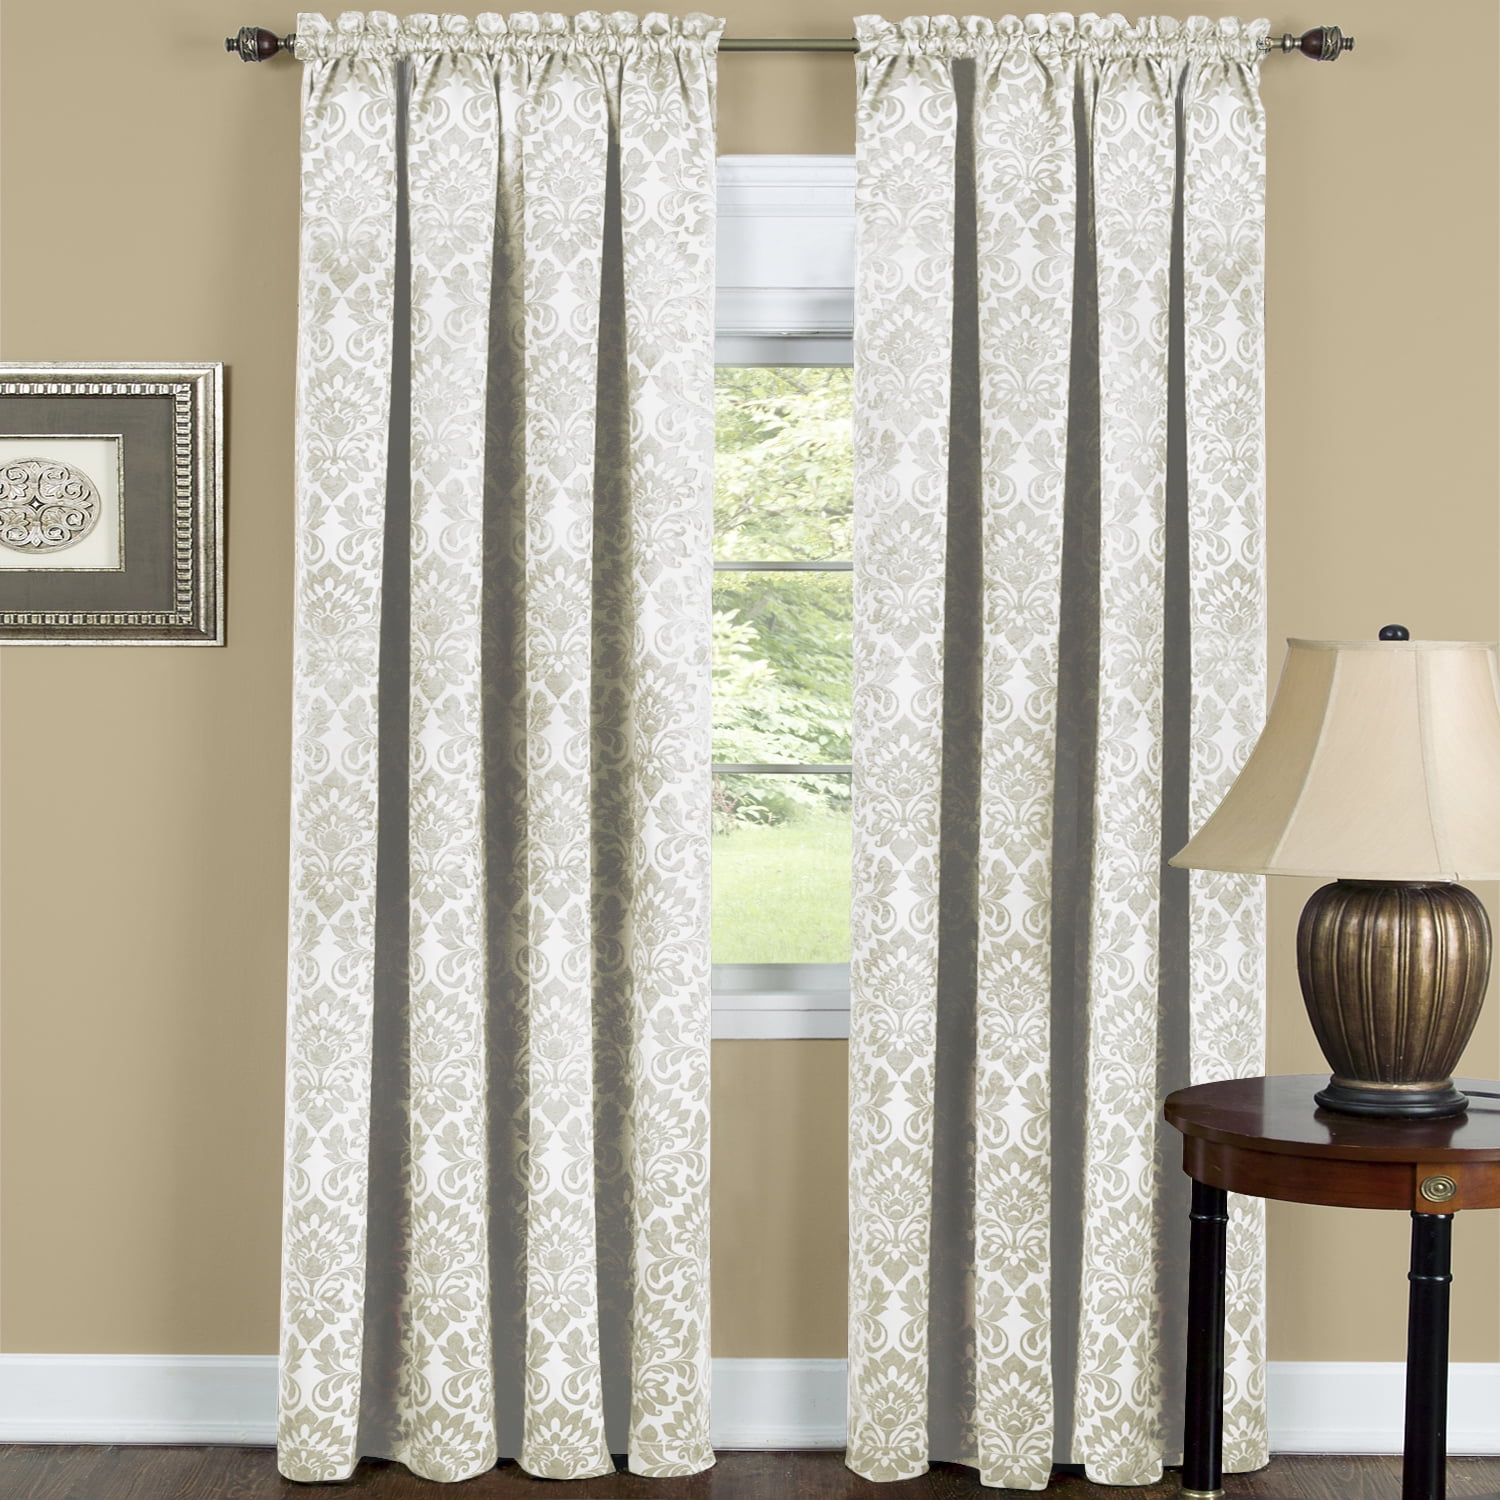 Achim Importing Co. Achim SUPN63IV12 52 x 63 in. Polyester Blackout Rod Pocket Single Curtain Panel, Ivory